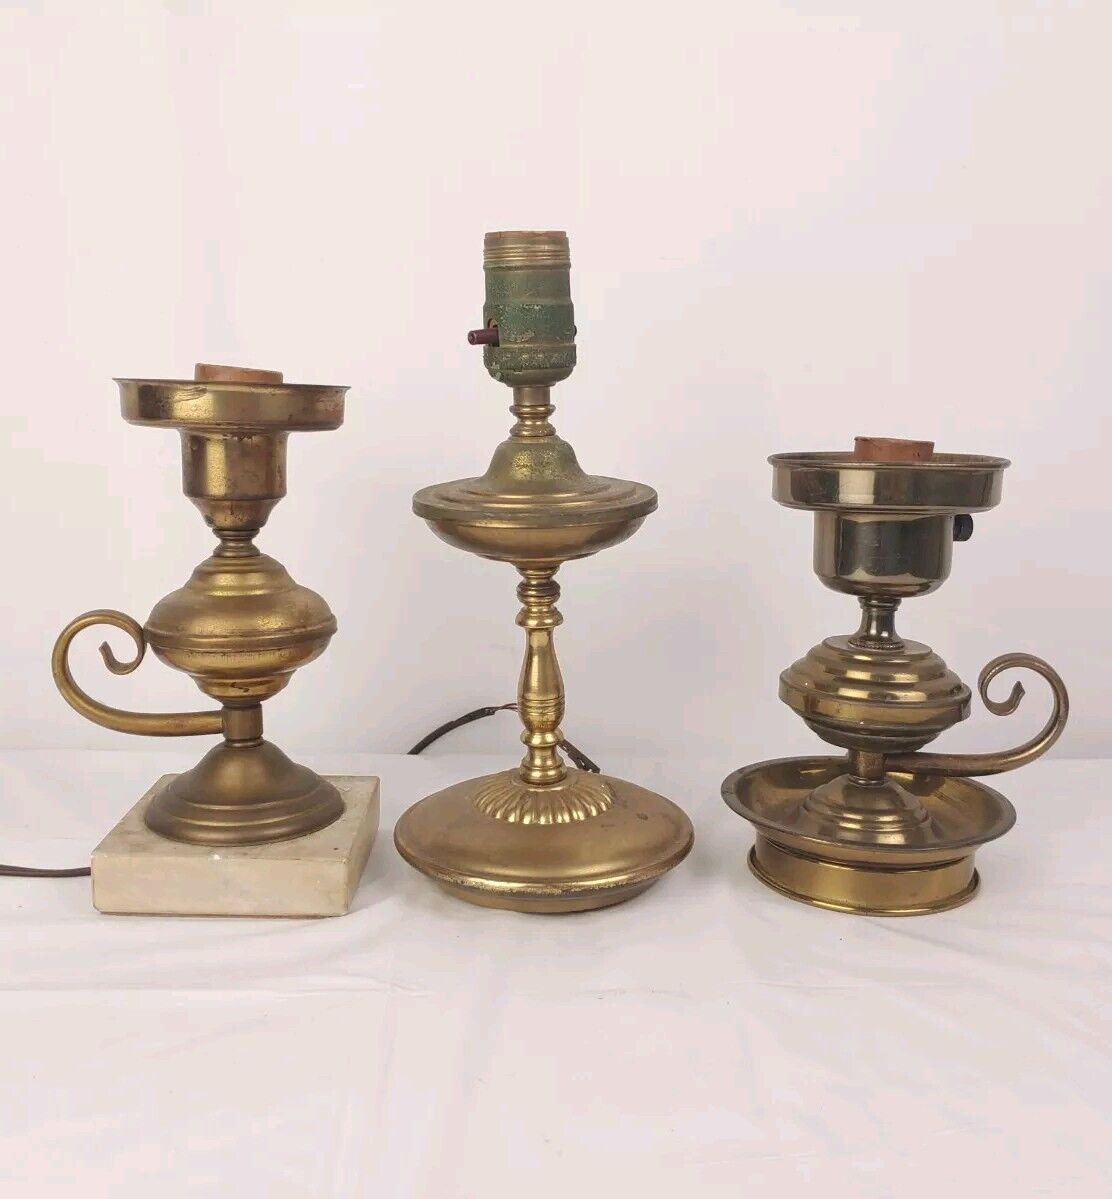 Lot of 3 Three Vintage Pressed Brass Lamps Candlestick Chamberstick Parts Repair